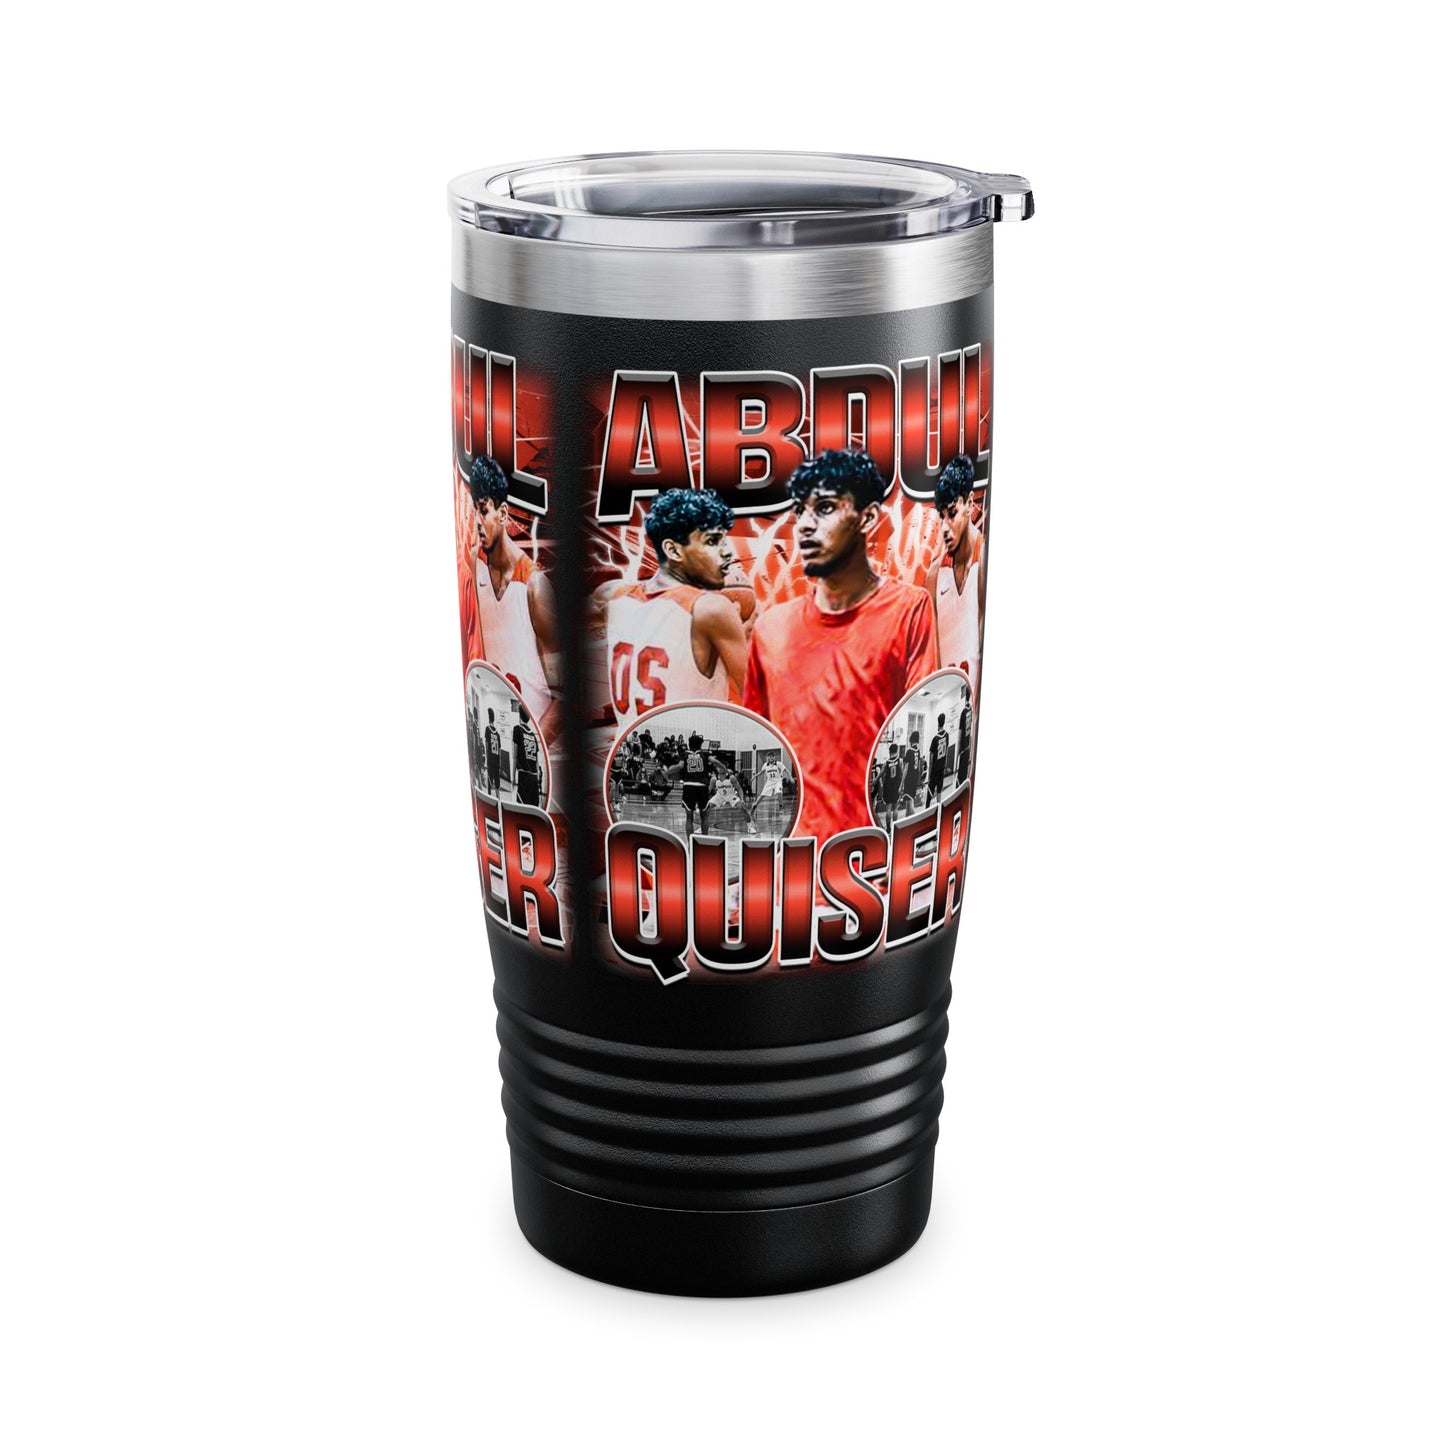 Abdul Quiser Stainless Steal Tumbler